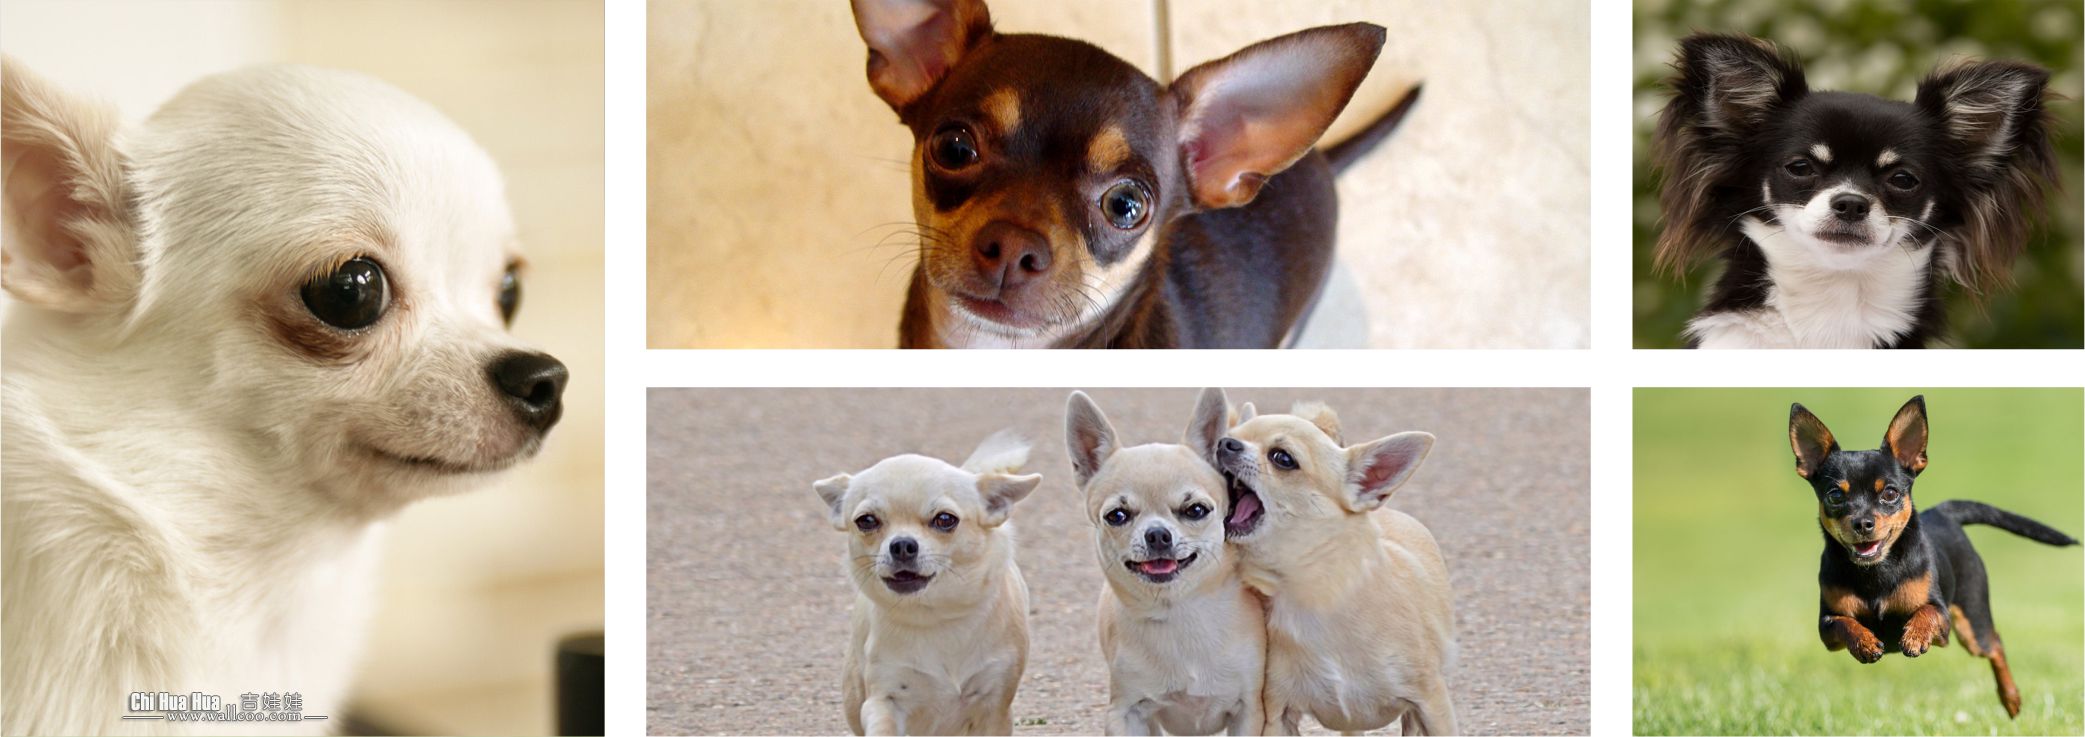 Cachorros Colombia - Chihuahua